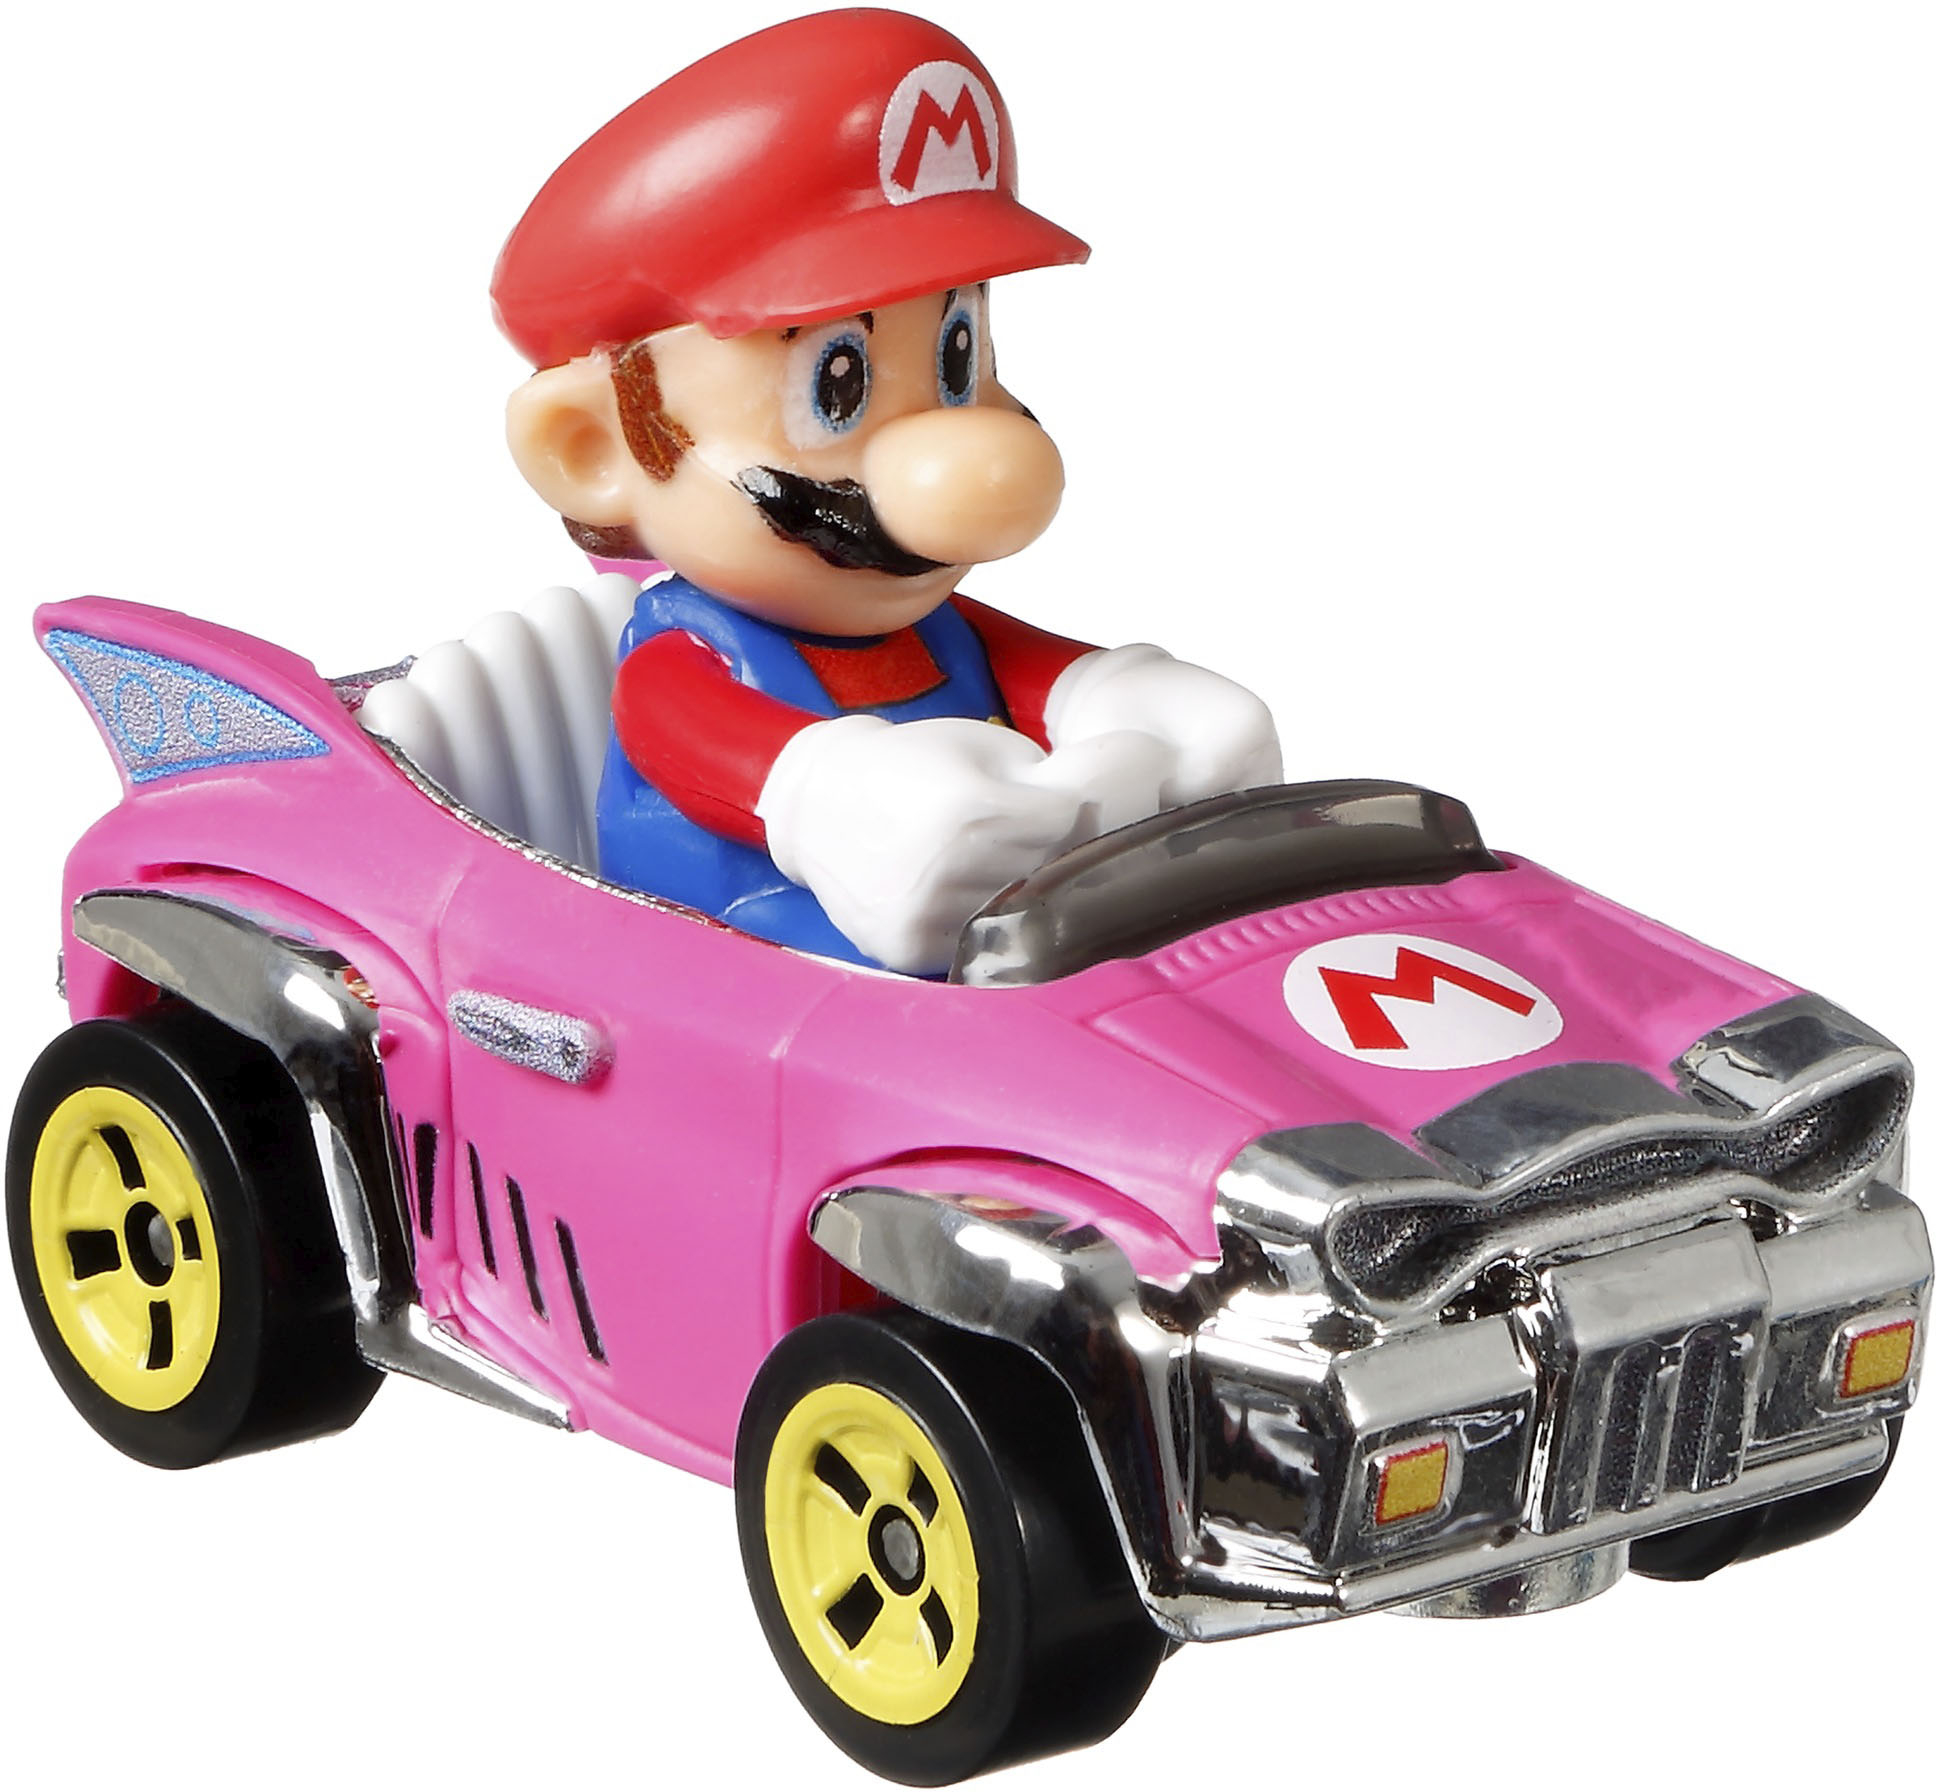 Make Your Own High-Speed Race Tracks With the Hot Wheels Mario